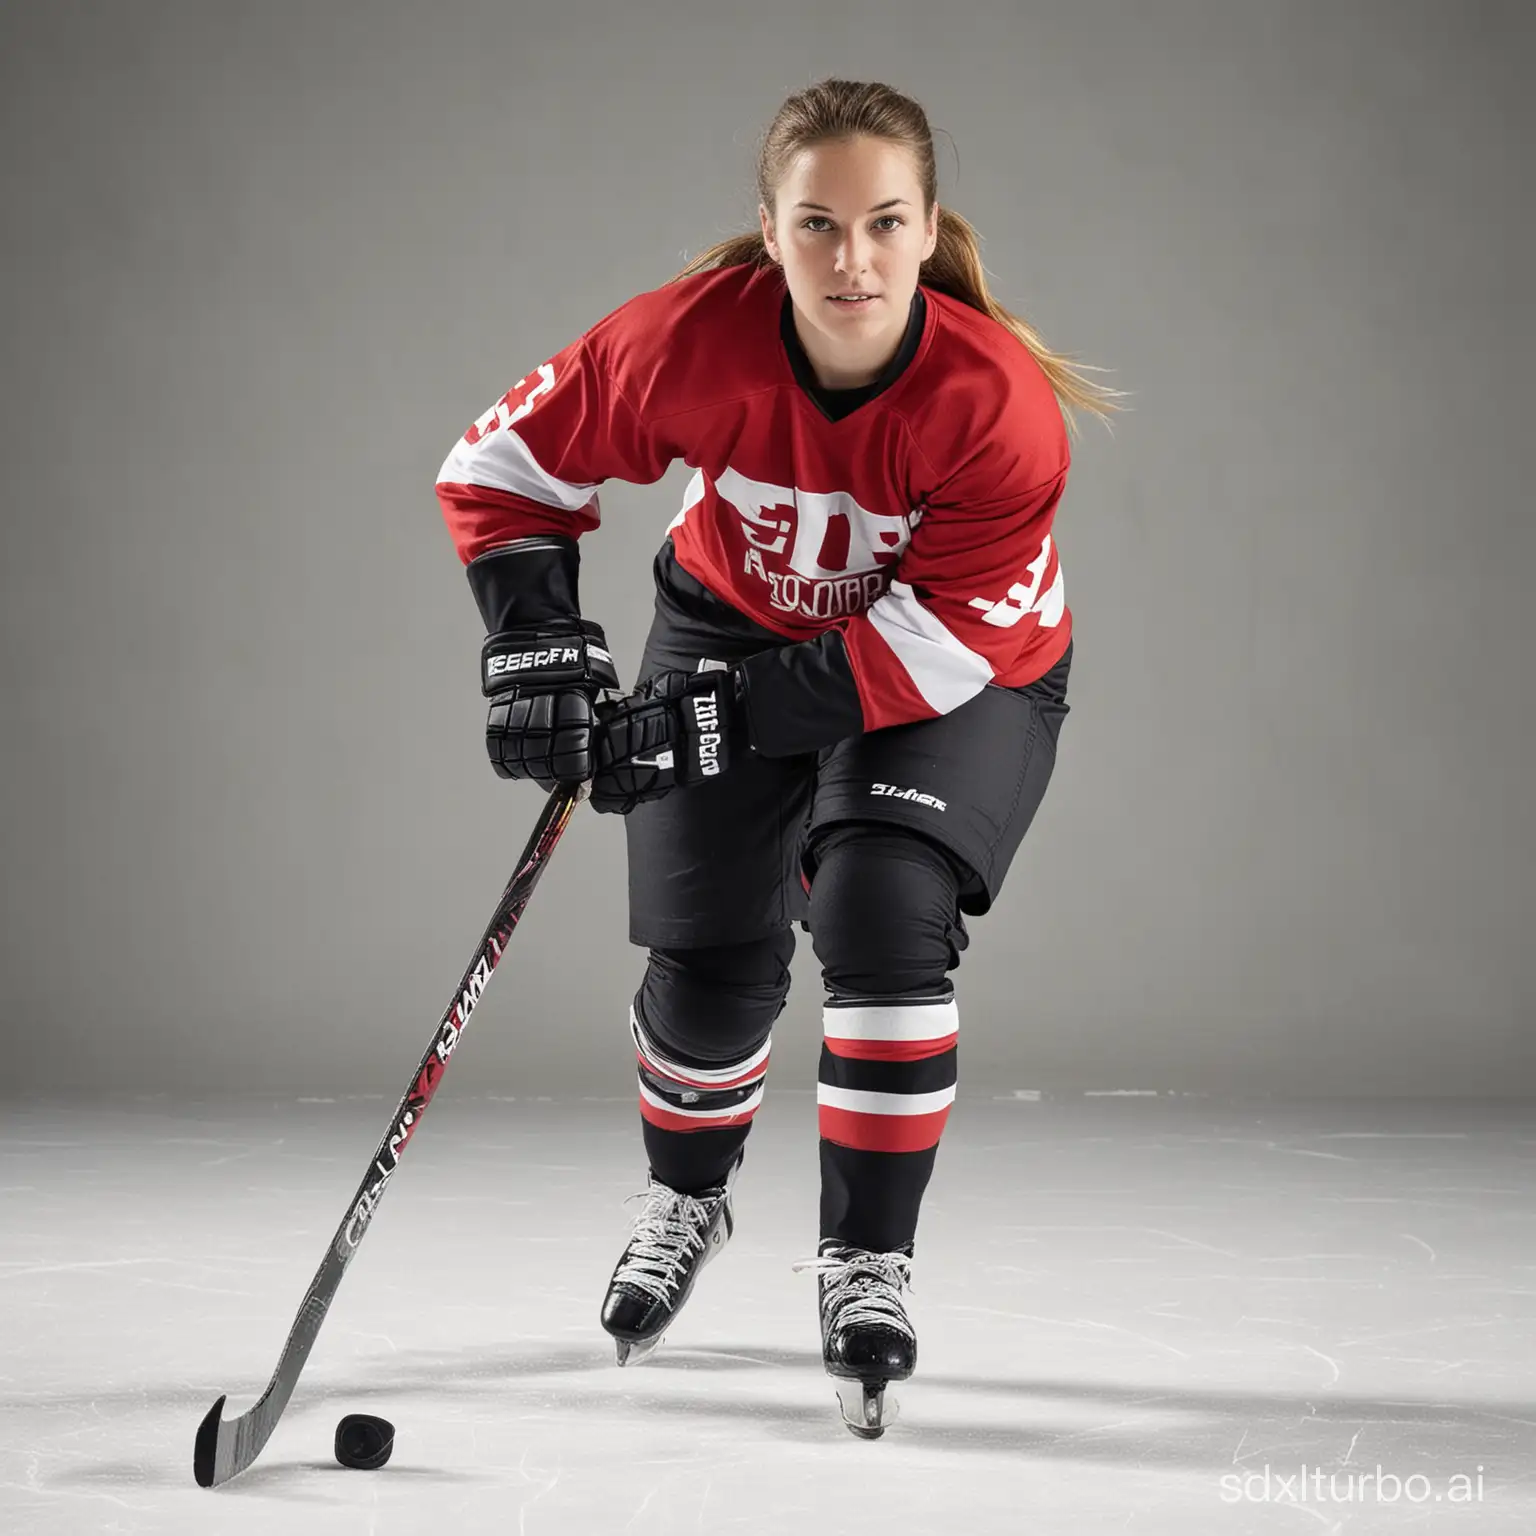 Female-Hockey-Player-in-Action-on-Ice